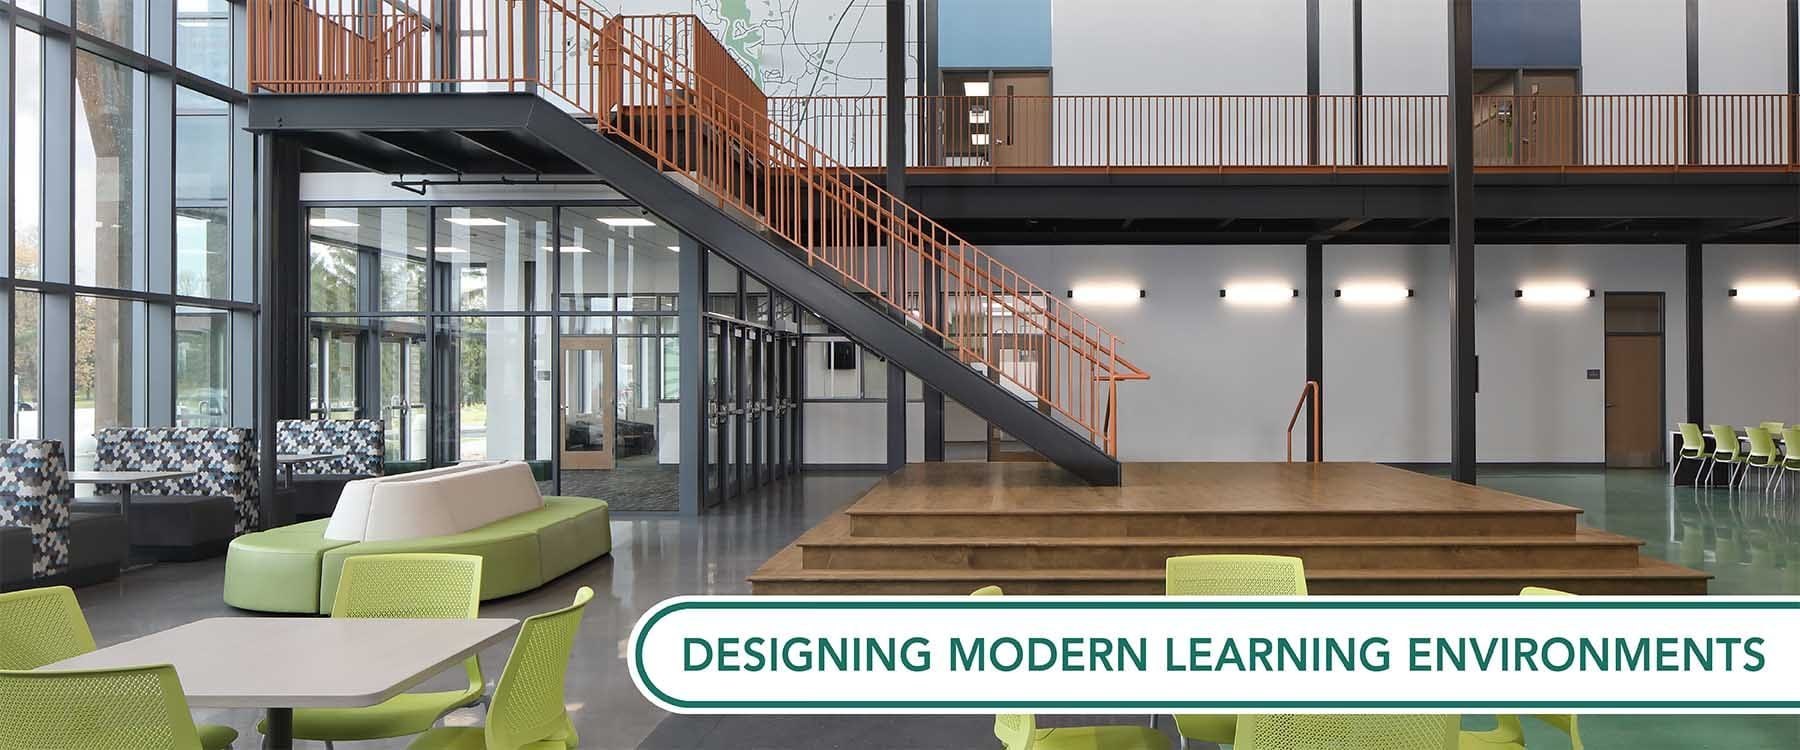 Rethinking Our Educational Environments Designing Modern Learning Spaces by PRA's education design studio partner Nick Kent